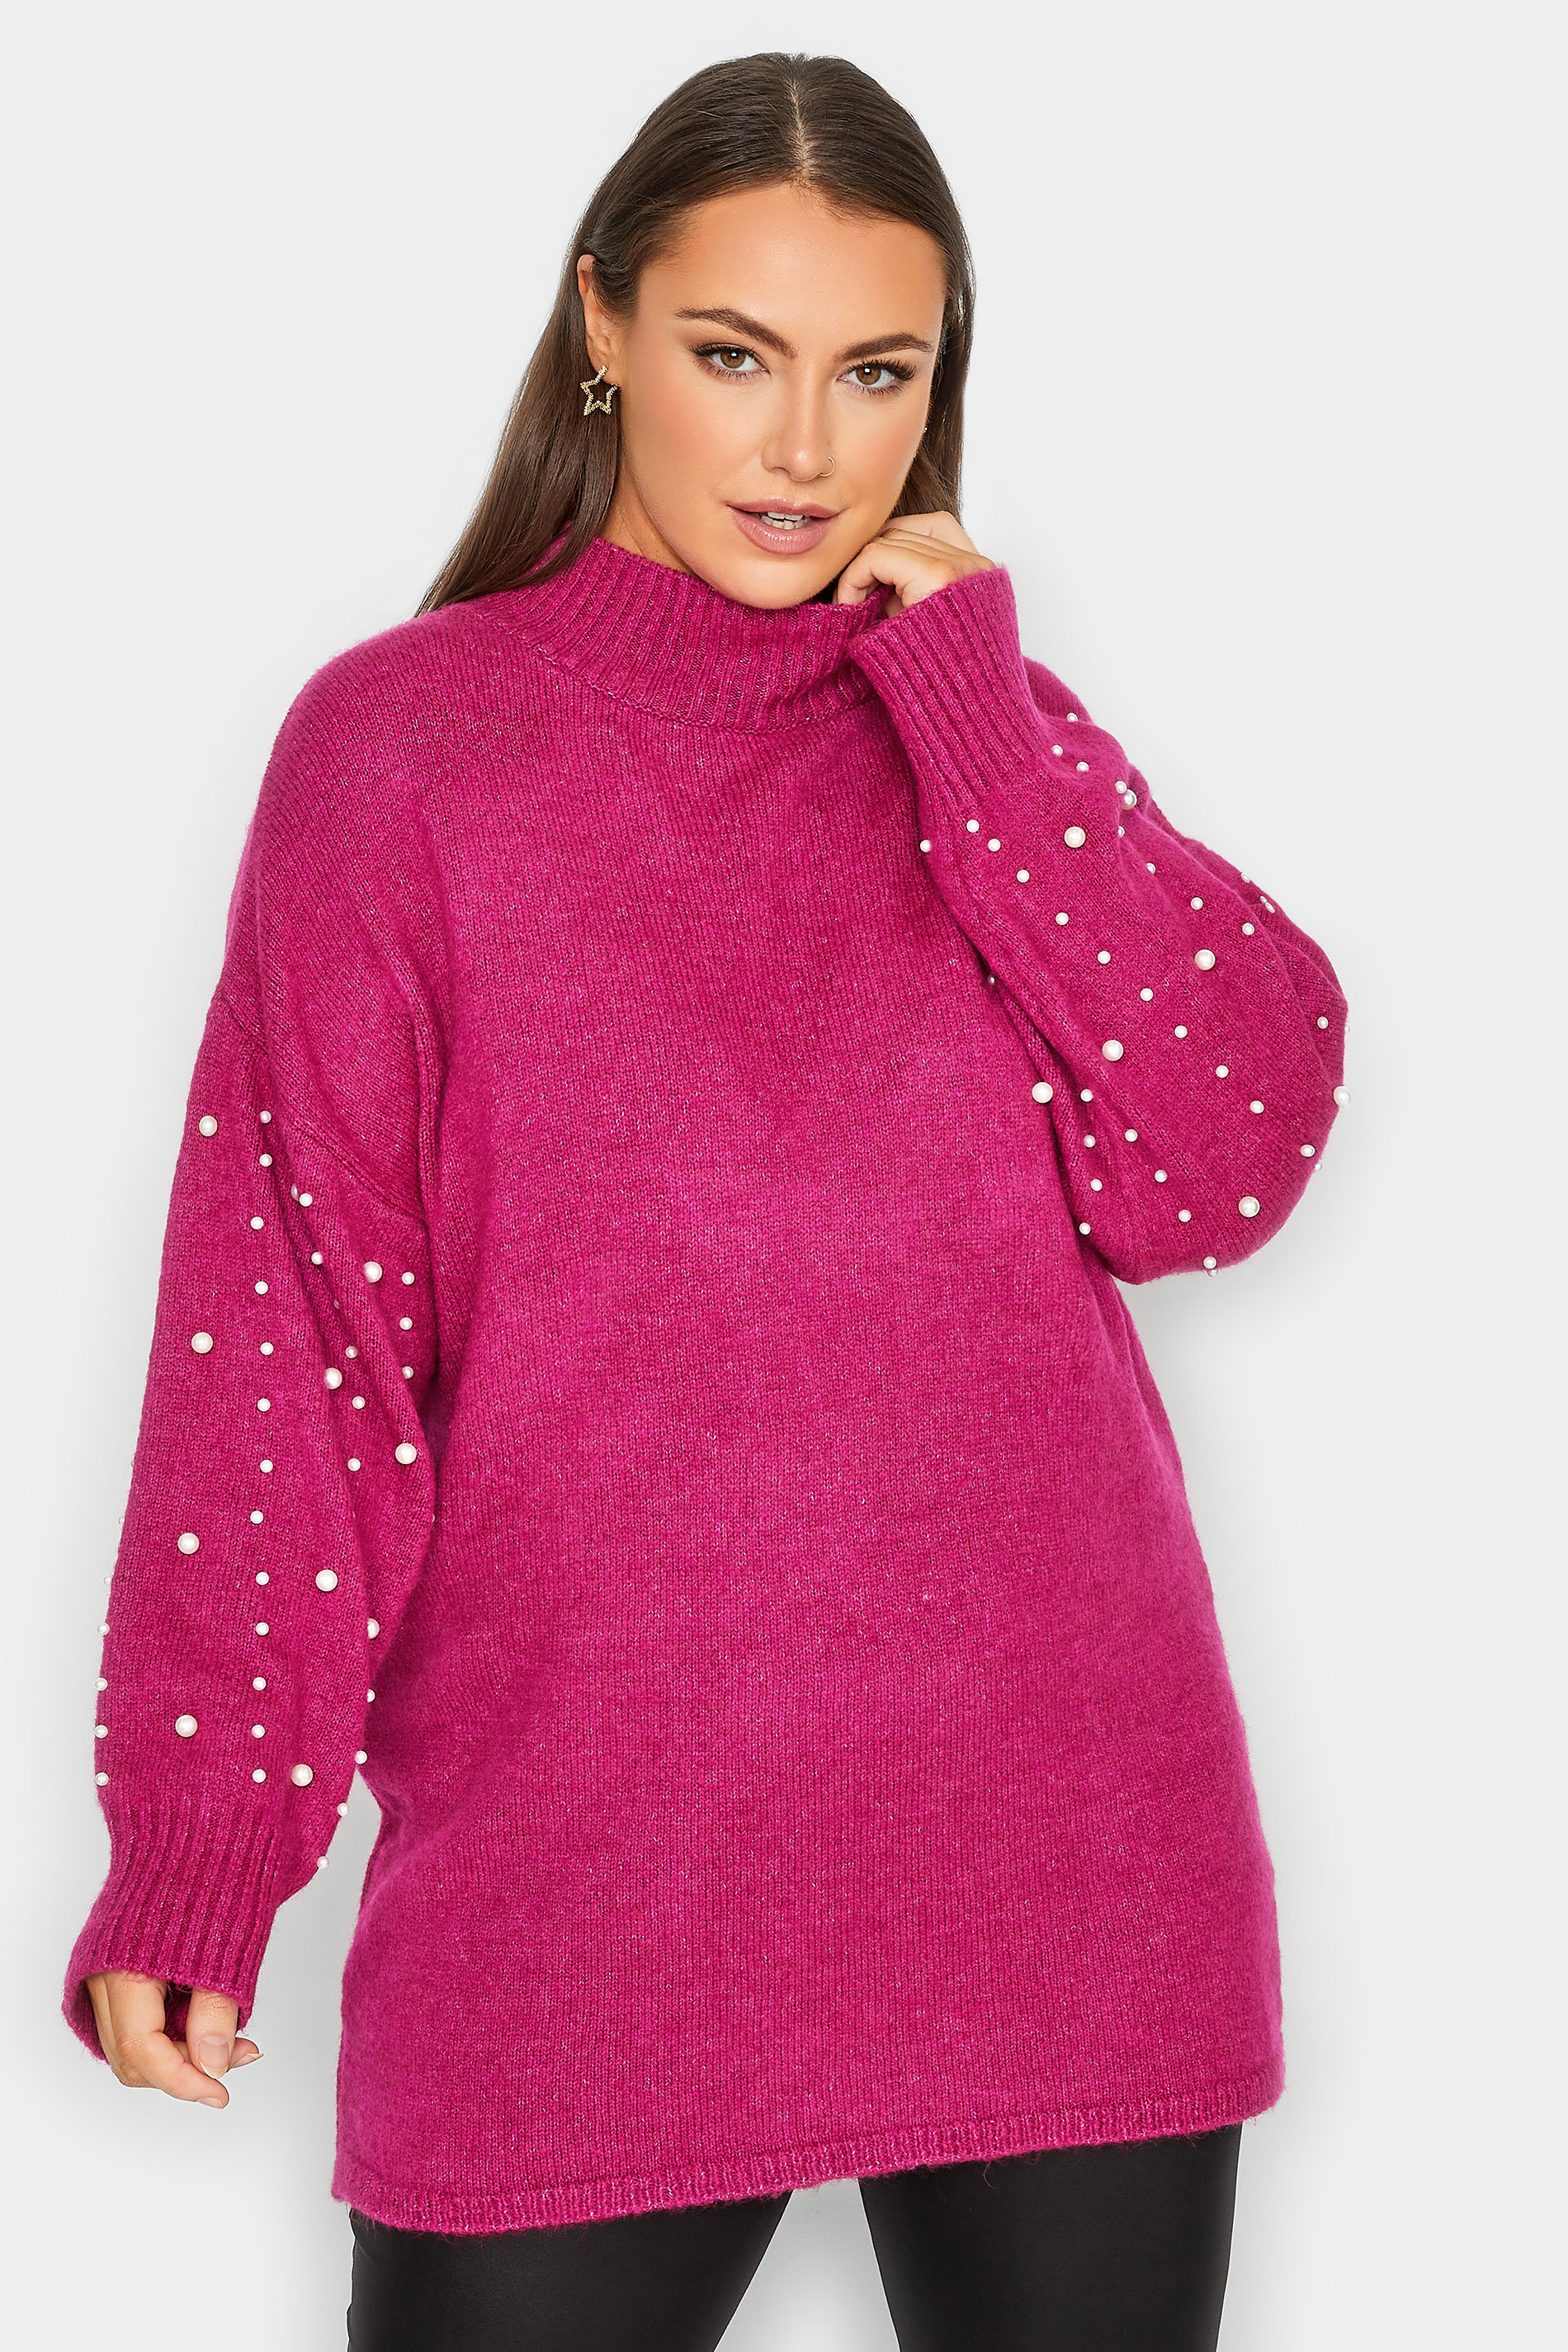 YOURS LUXURY Plus Size Pink Pearl Embellished Batwing Jumper | Yours Clothing 1